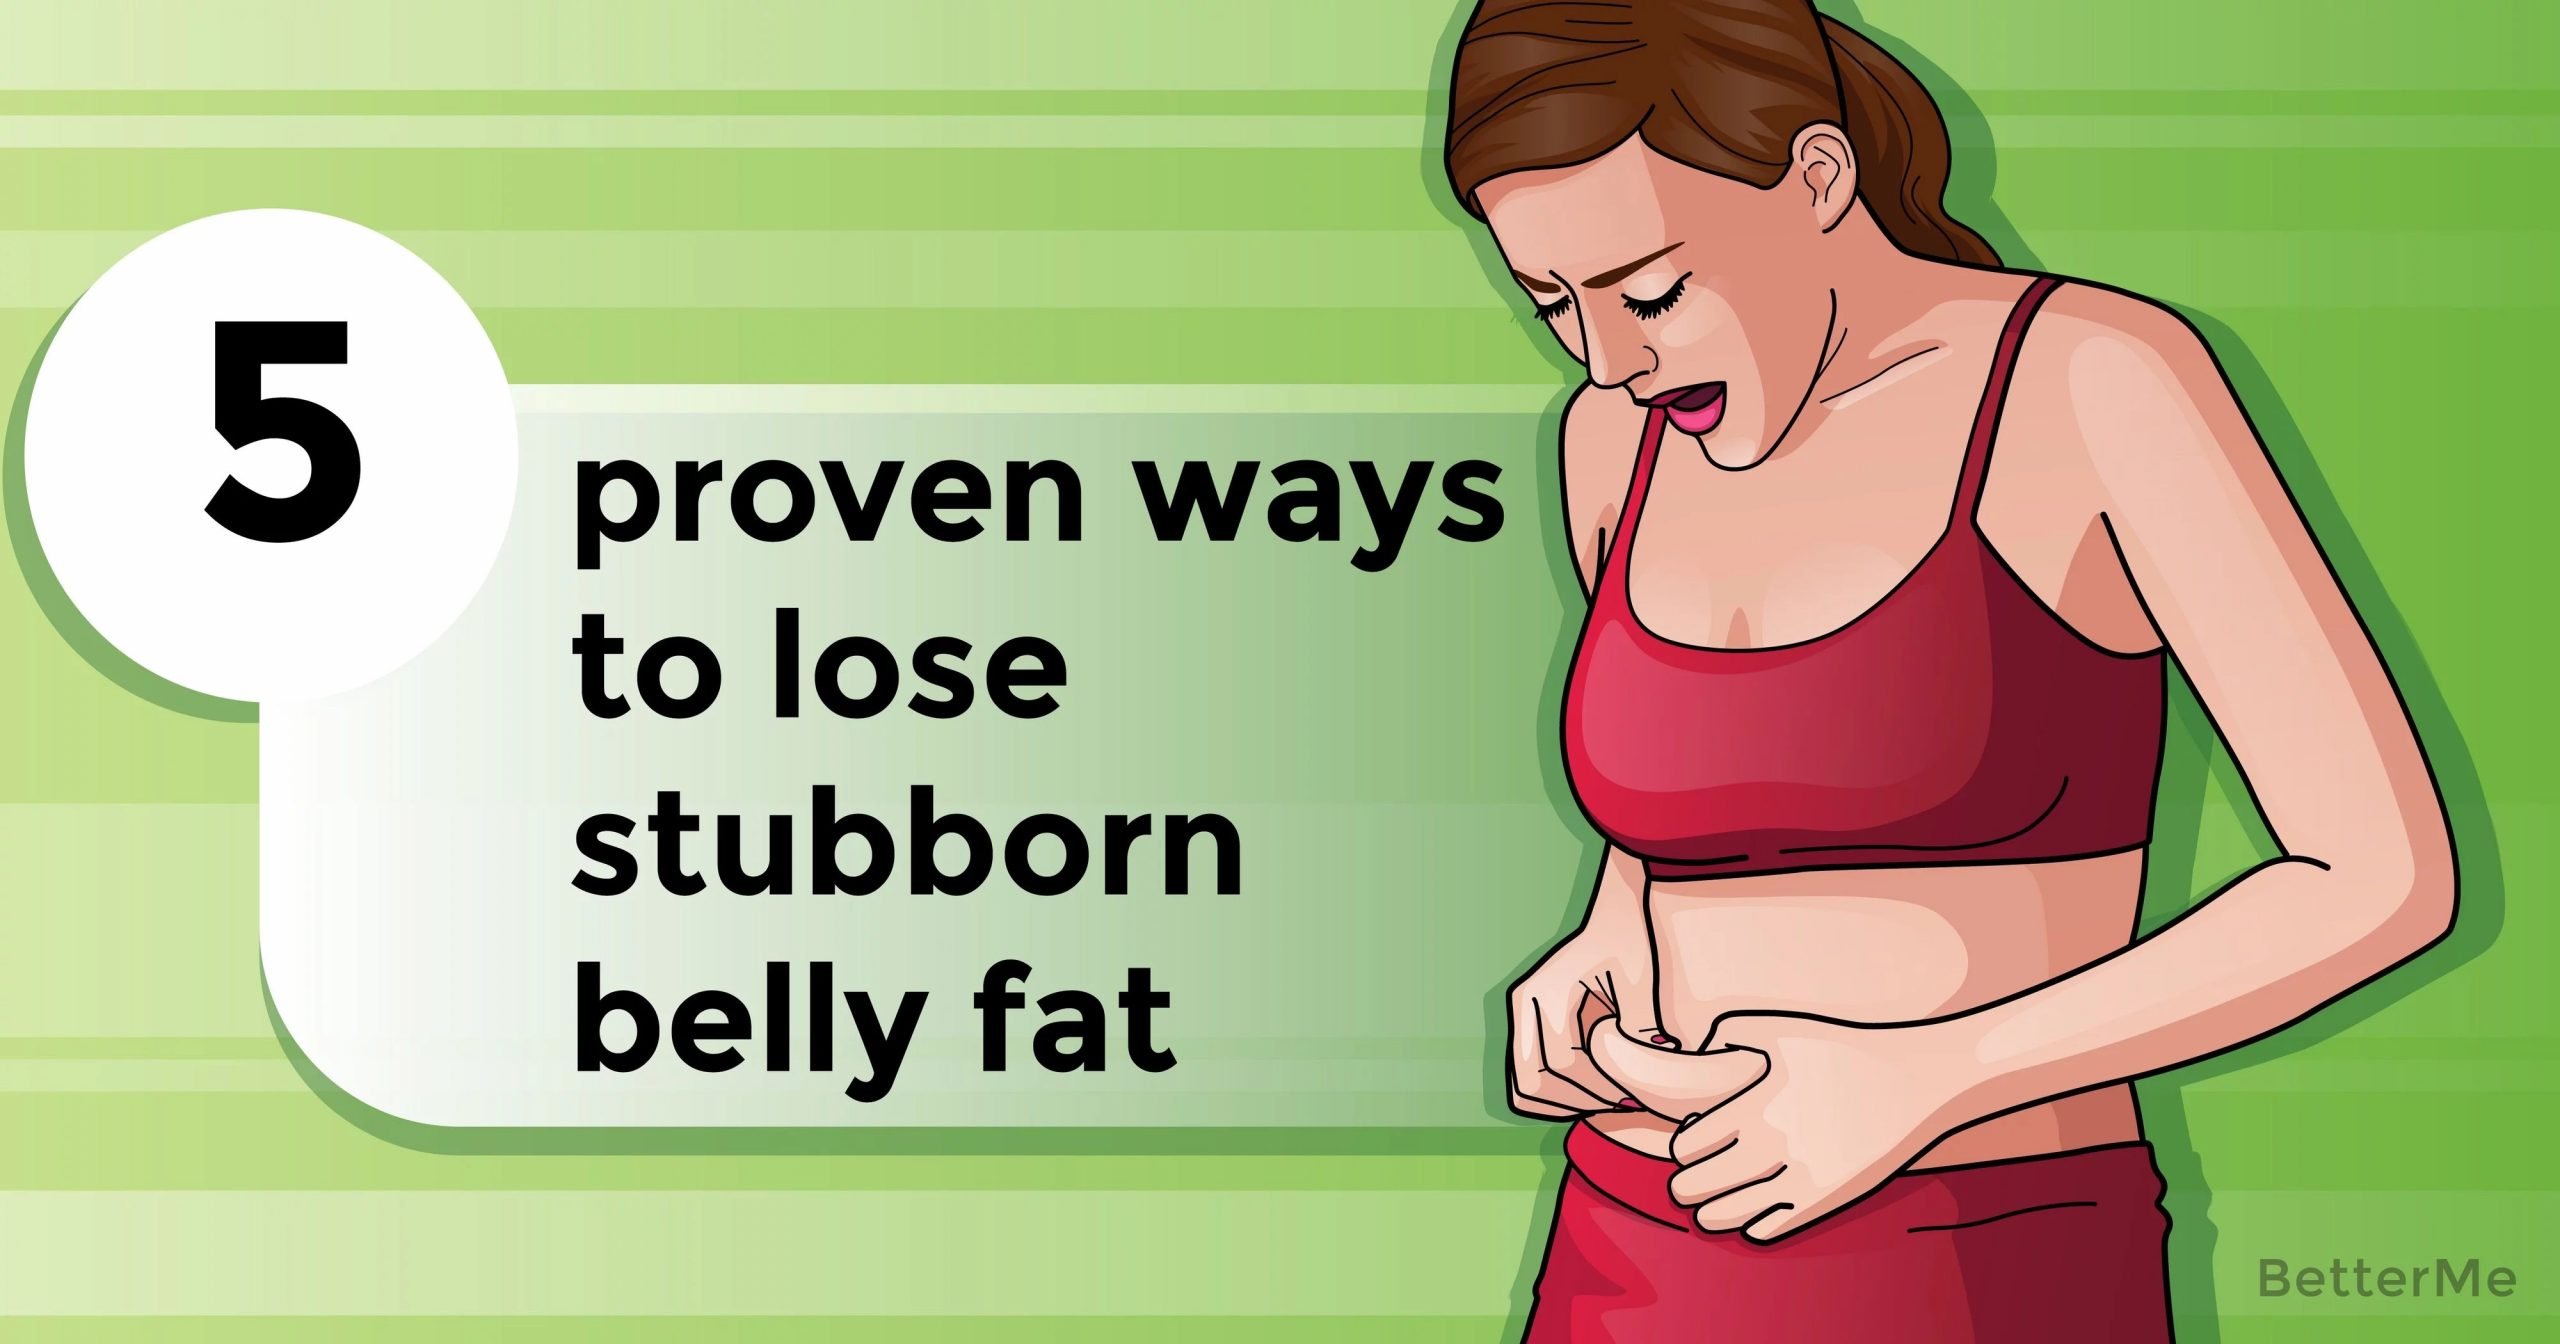 5 proven ways to lose stubborn belly fat